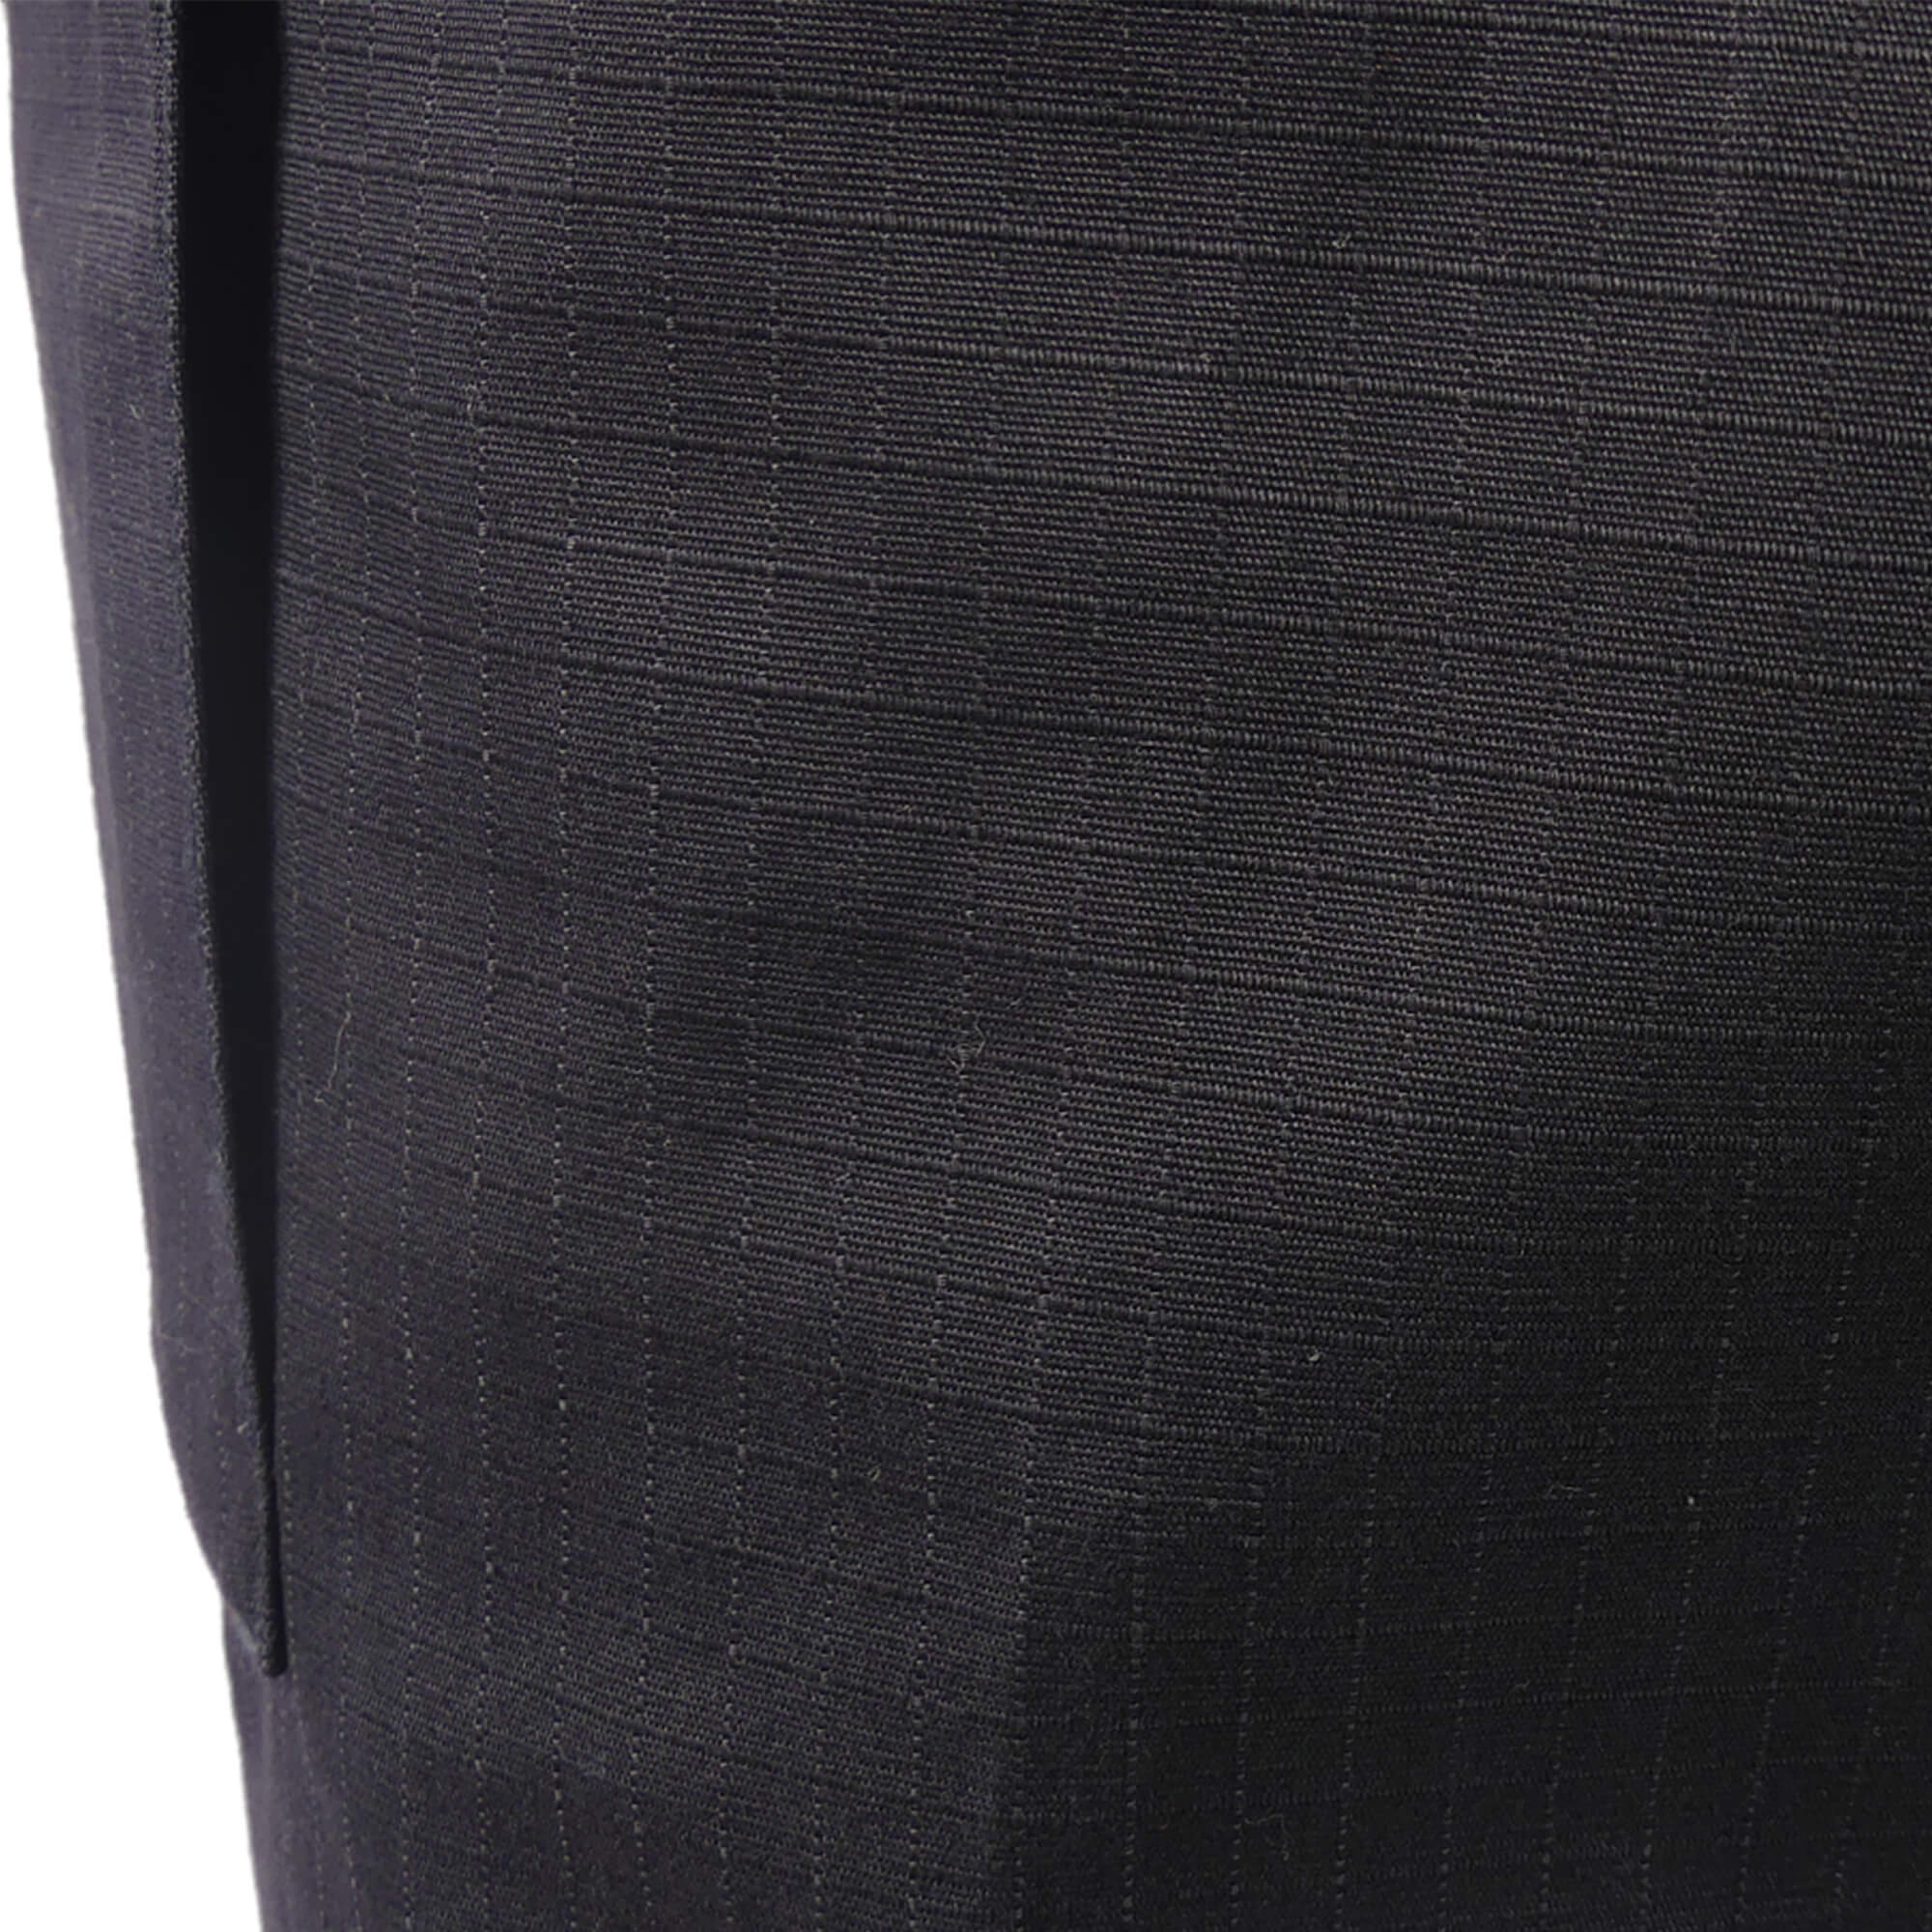 RIPS material for work suits, trousers and jackets